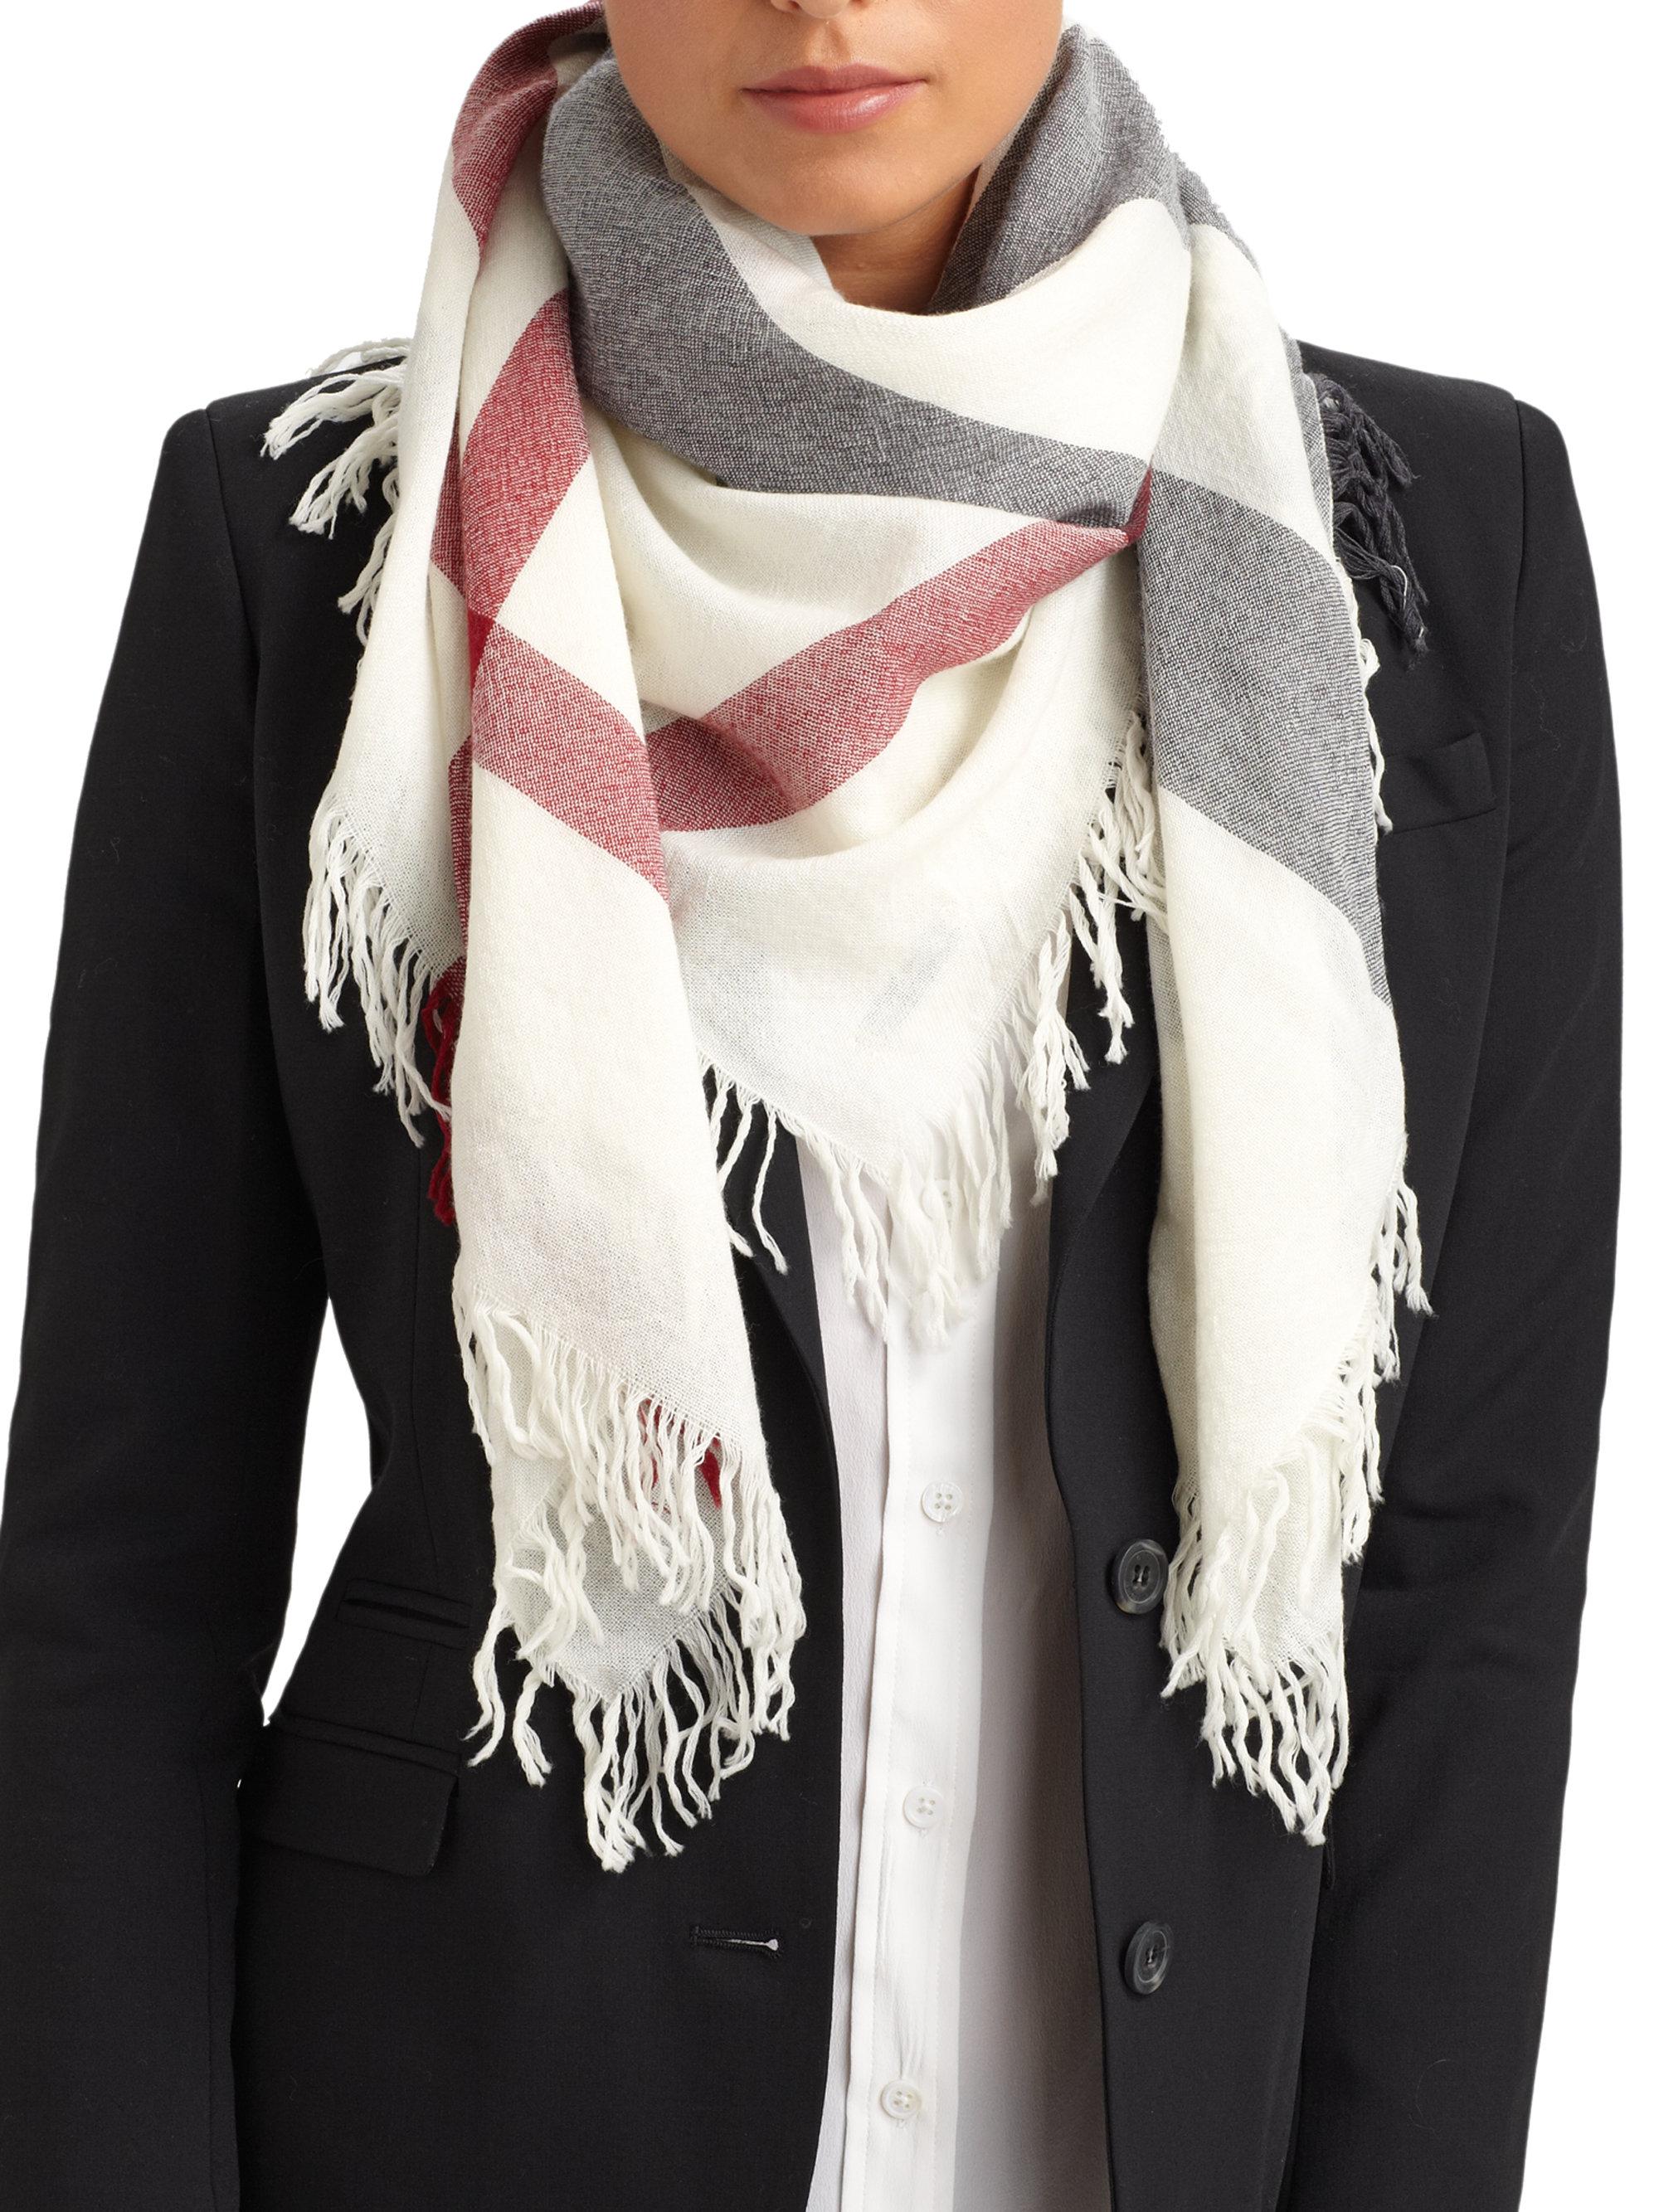 burberry color check wool scarf